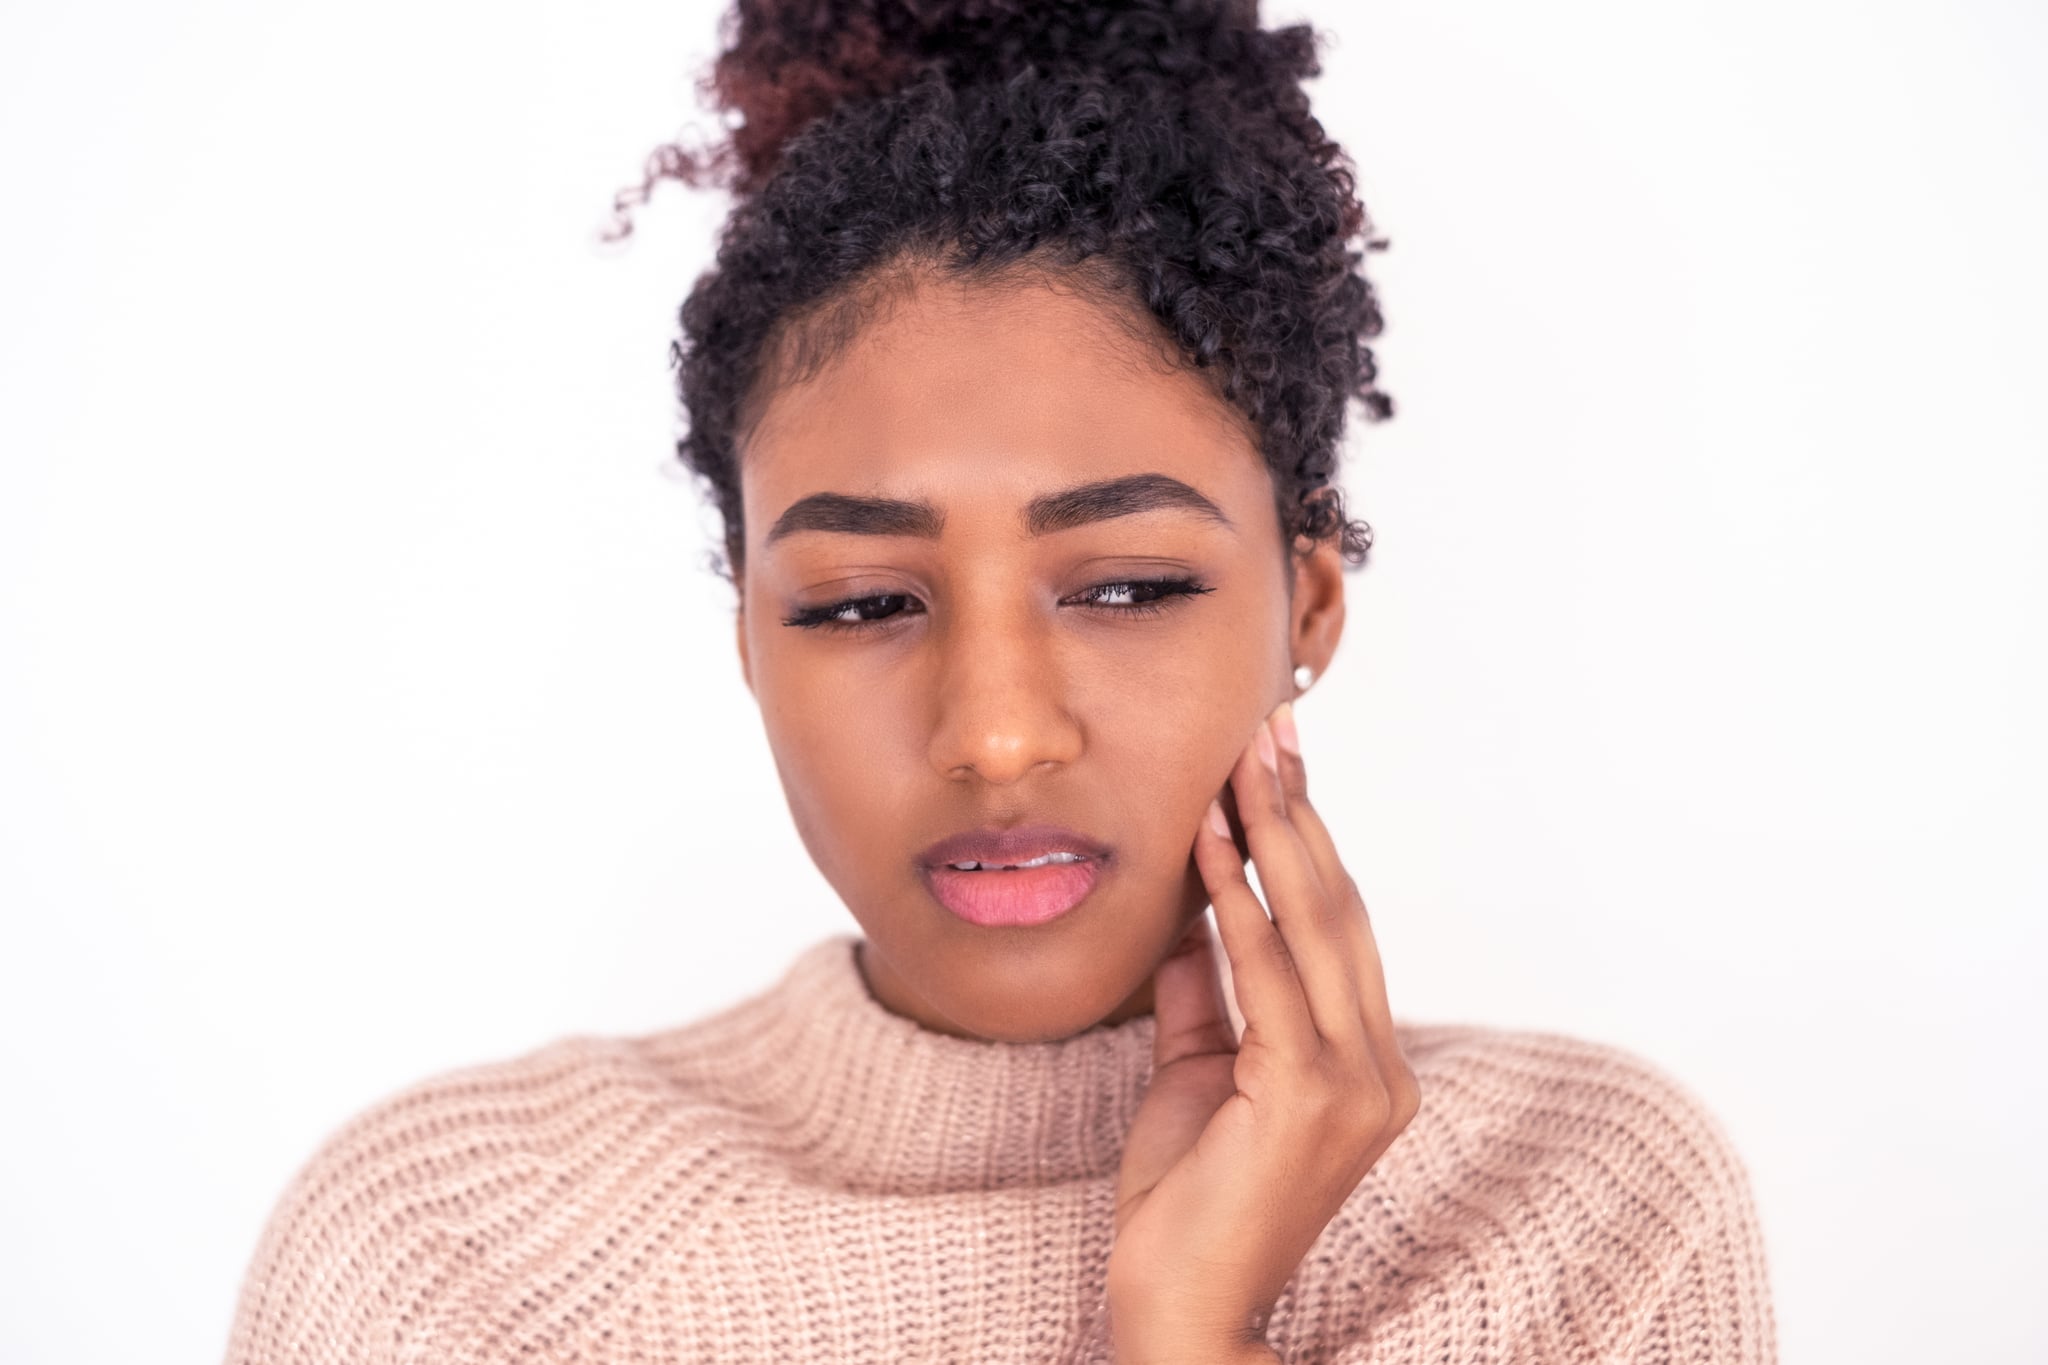 Portrait of young black woman suffering dental pain isolated on white background